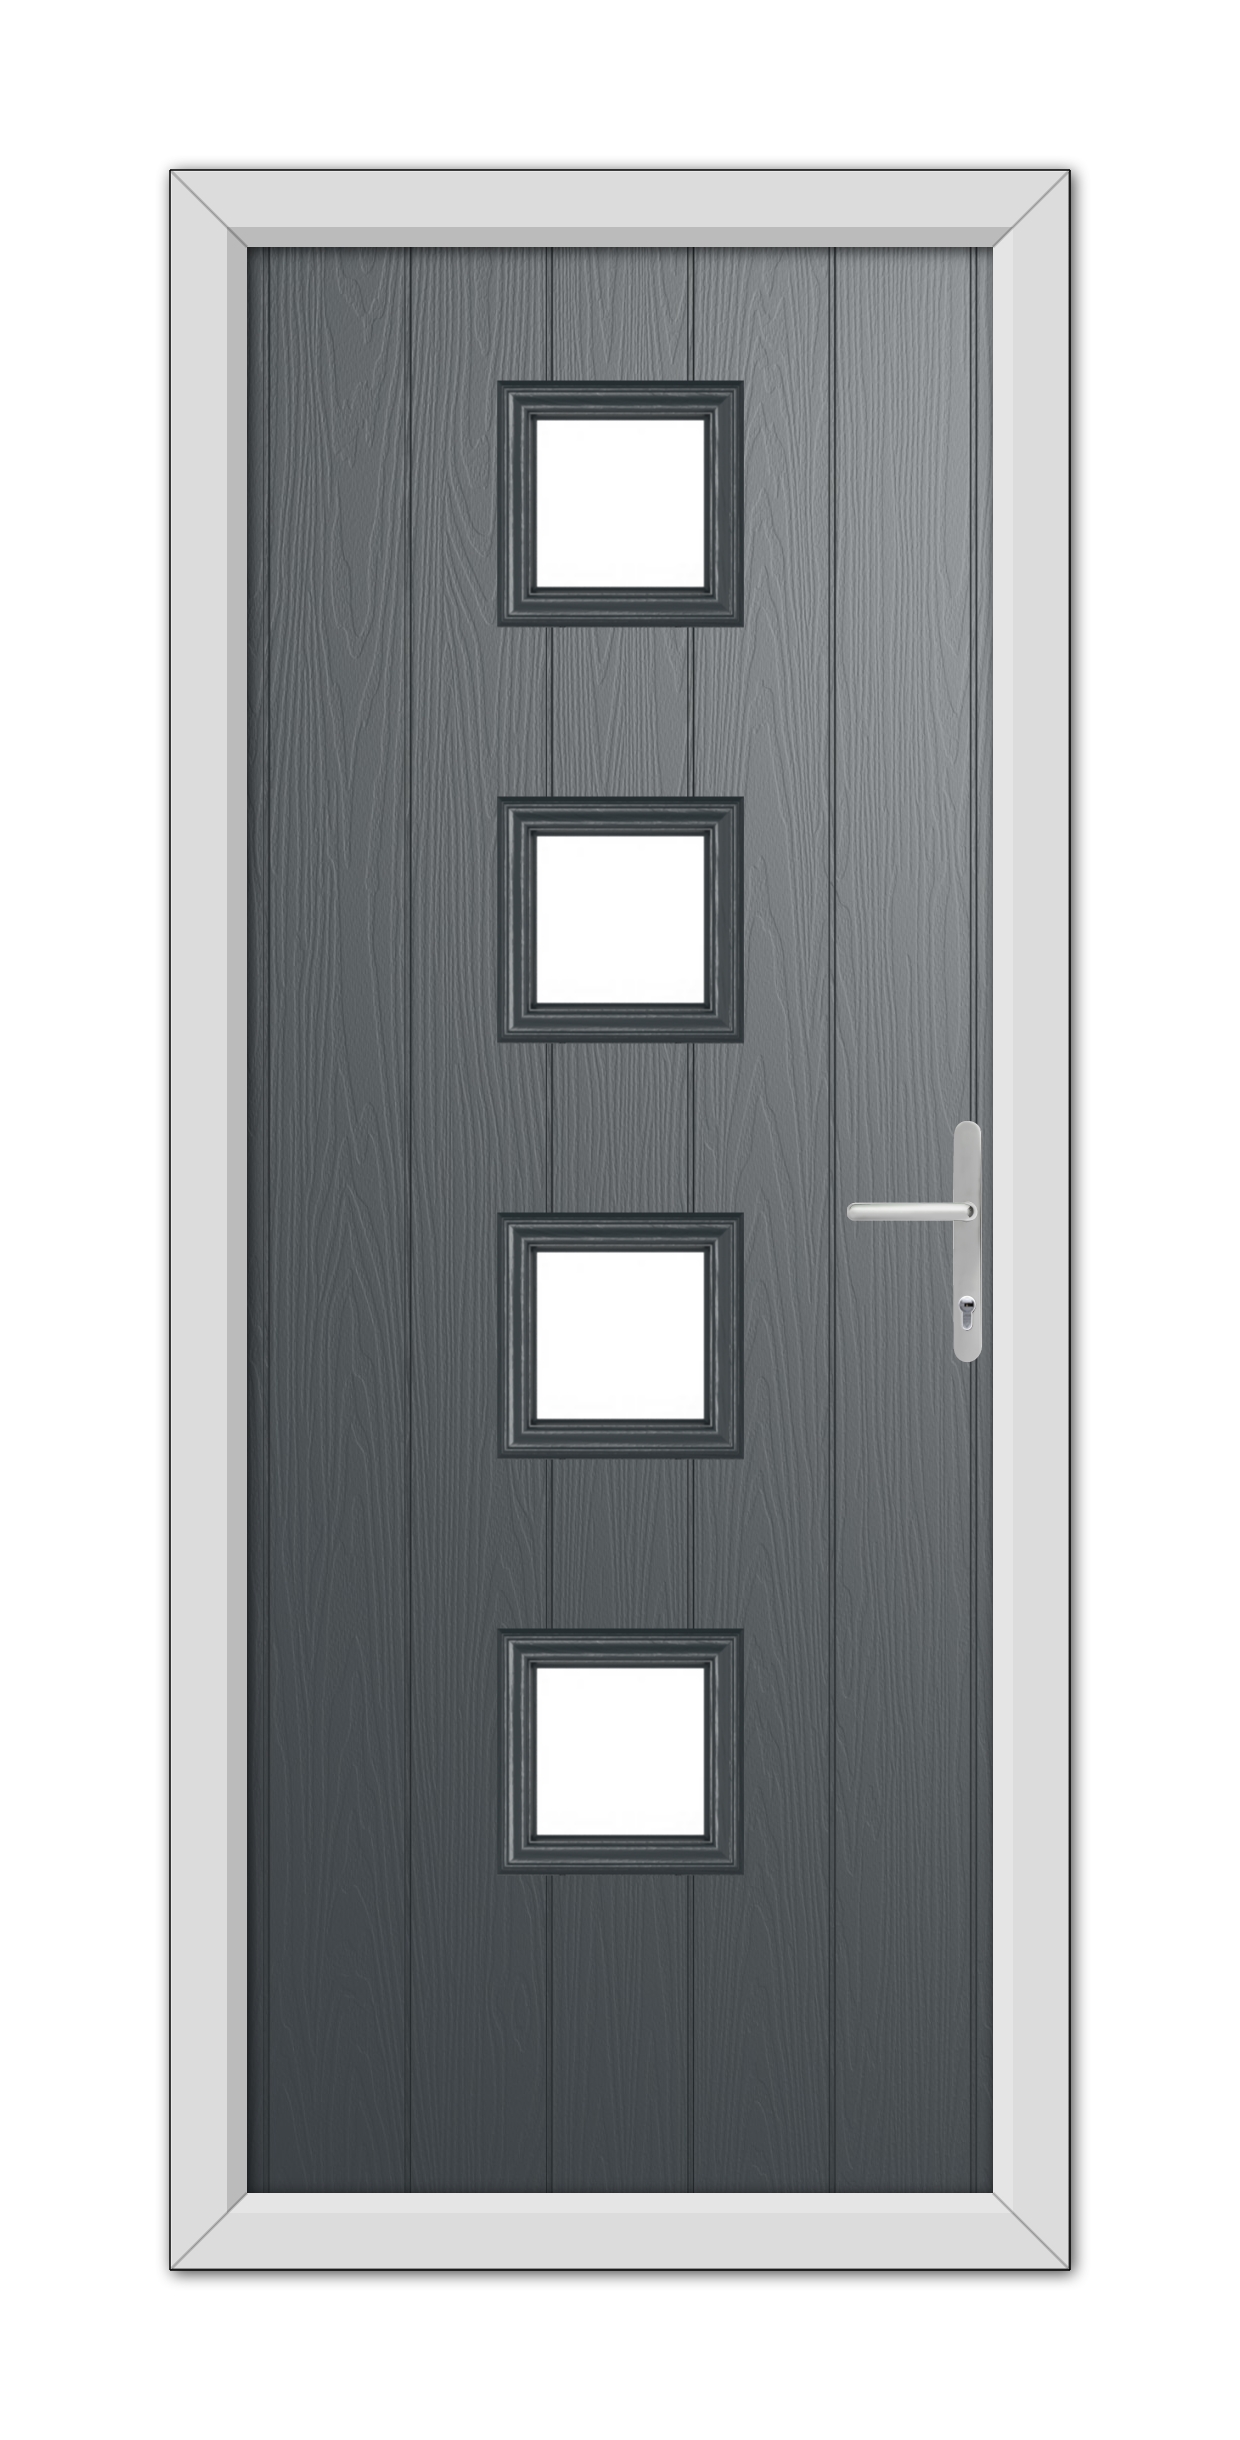 A modern Anthracite Grey Hamilton Composite Door 48mm Timber Core featuring four rectangular windows and a silver handle, set within a white frame.